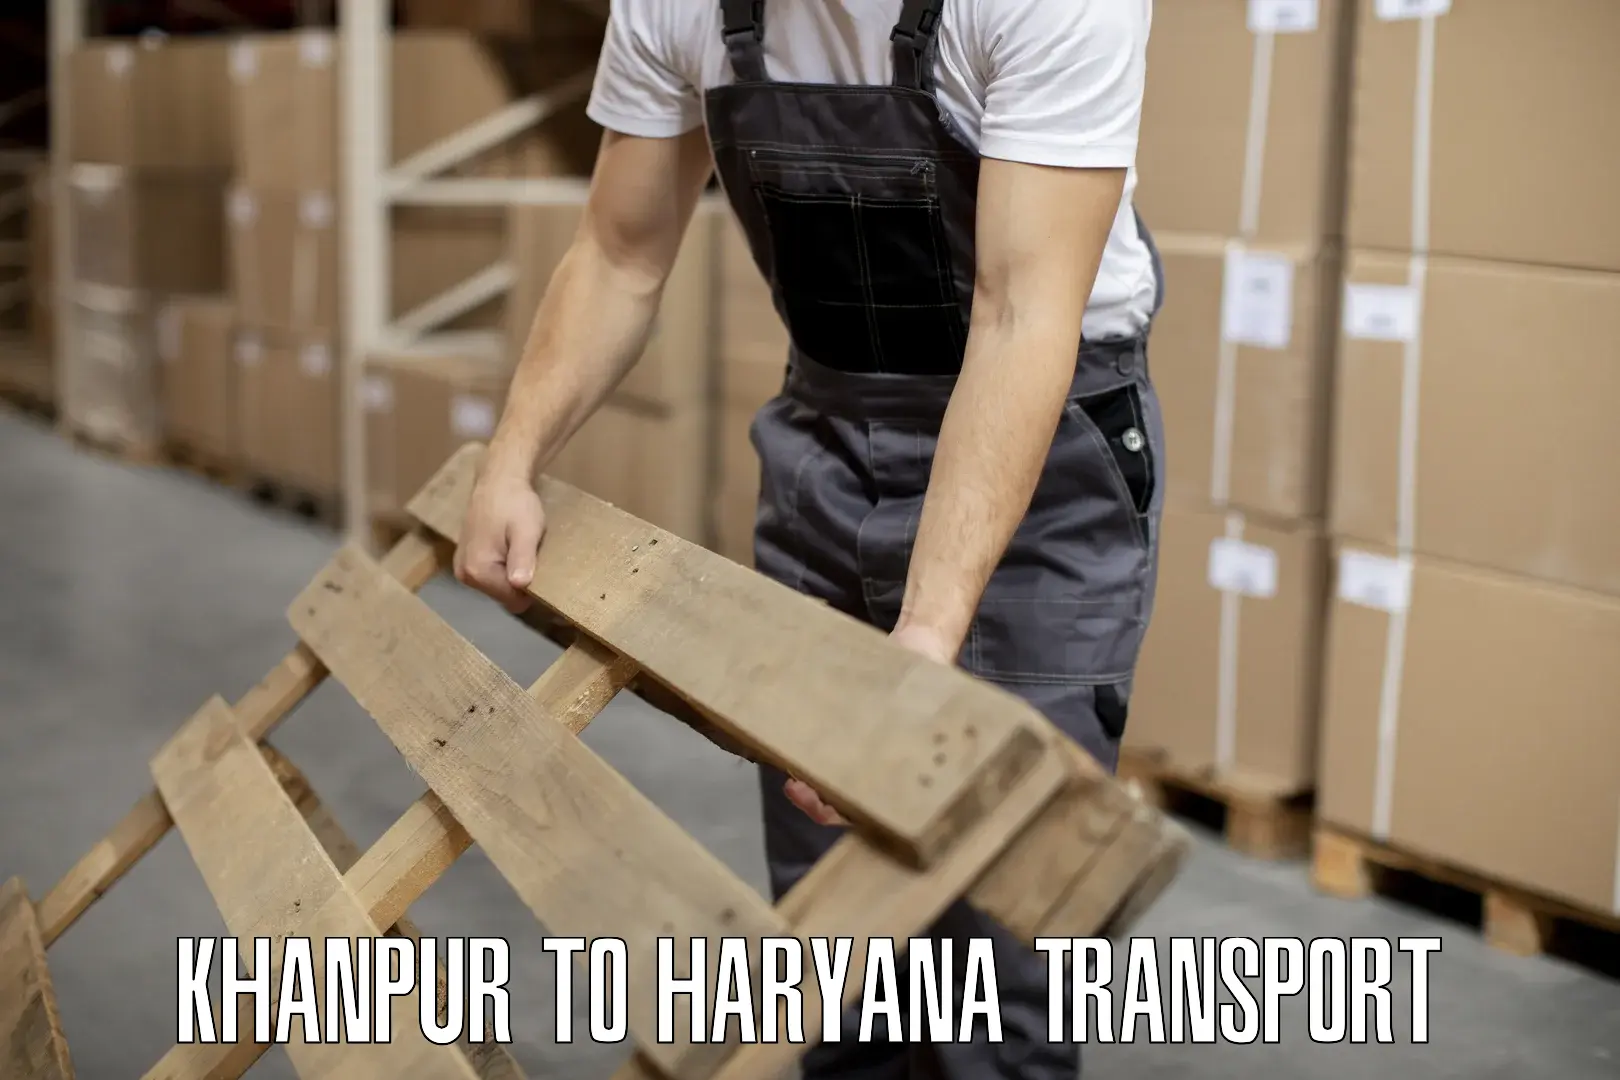 Vehicle transport services in Khanpur to Agroha